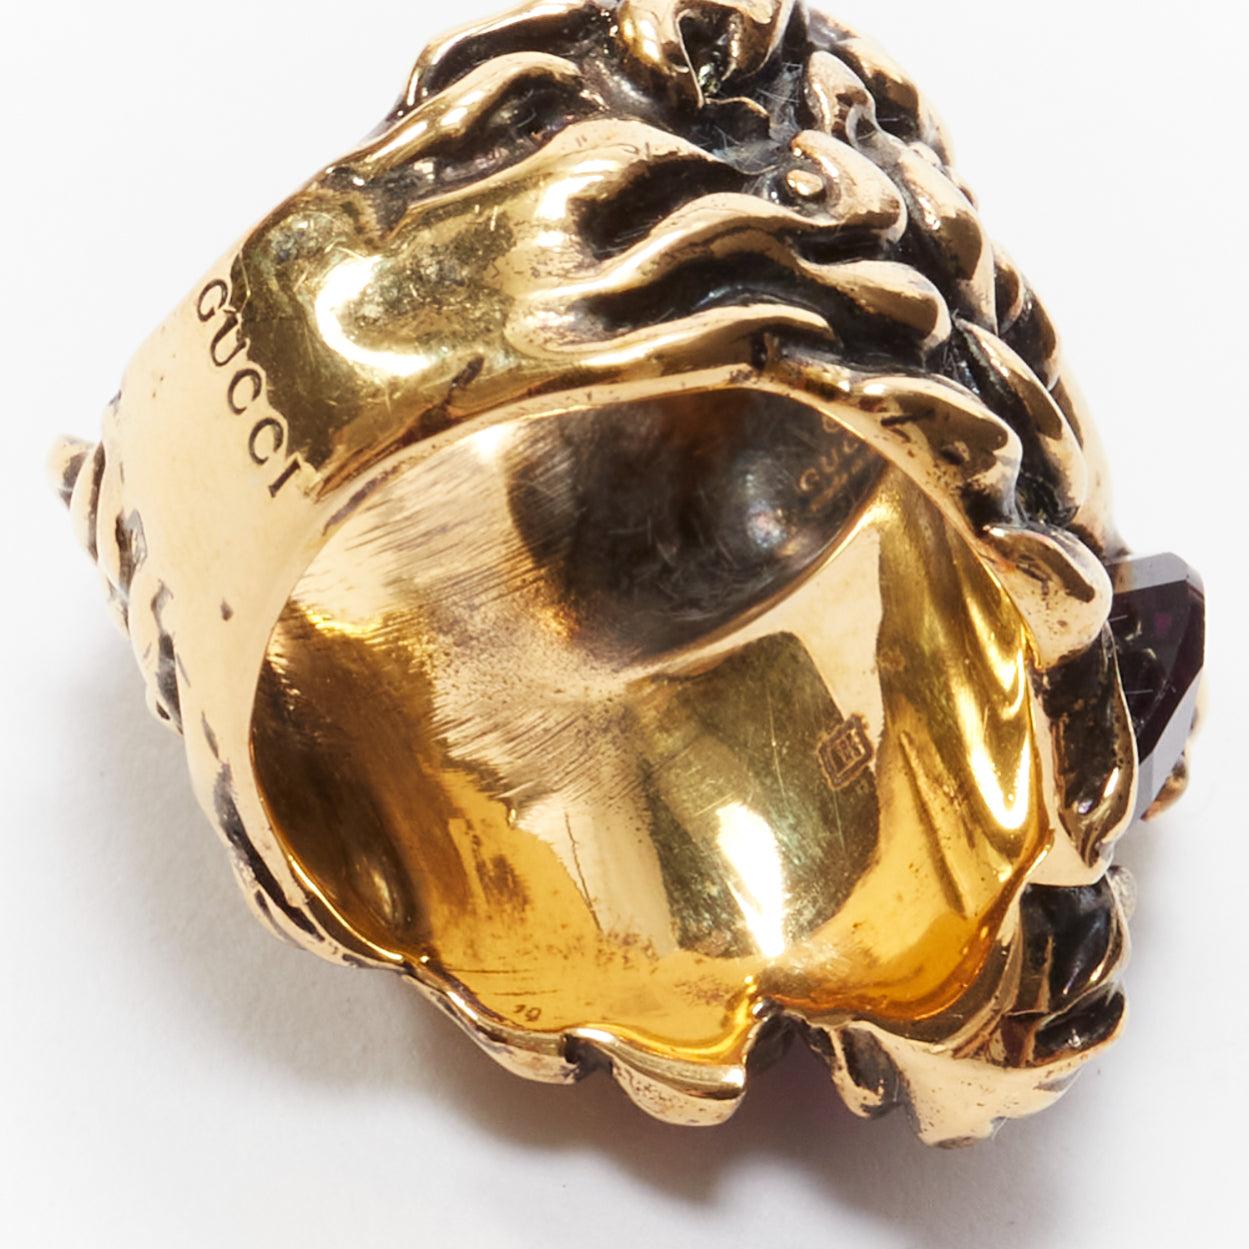 Women's GUCCI Alessandro Michele gold lion purple crystal oversized cocktail ring Sz1